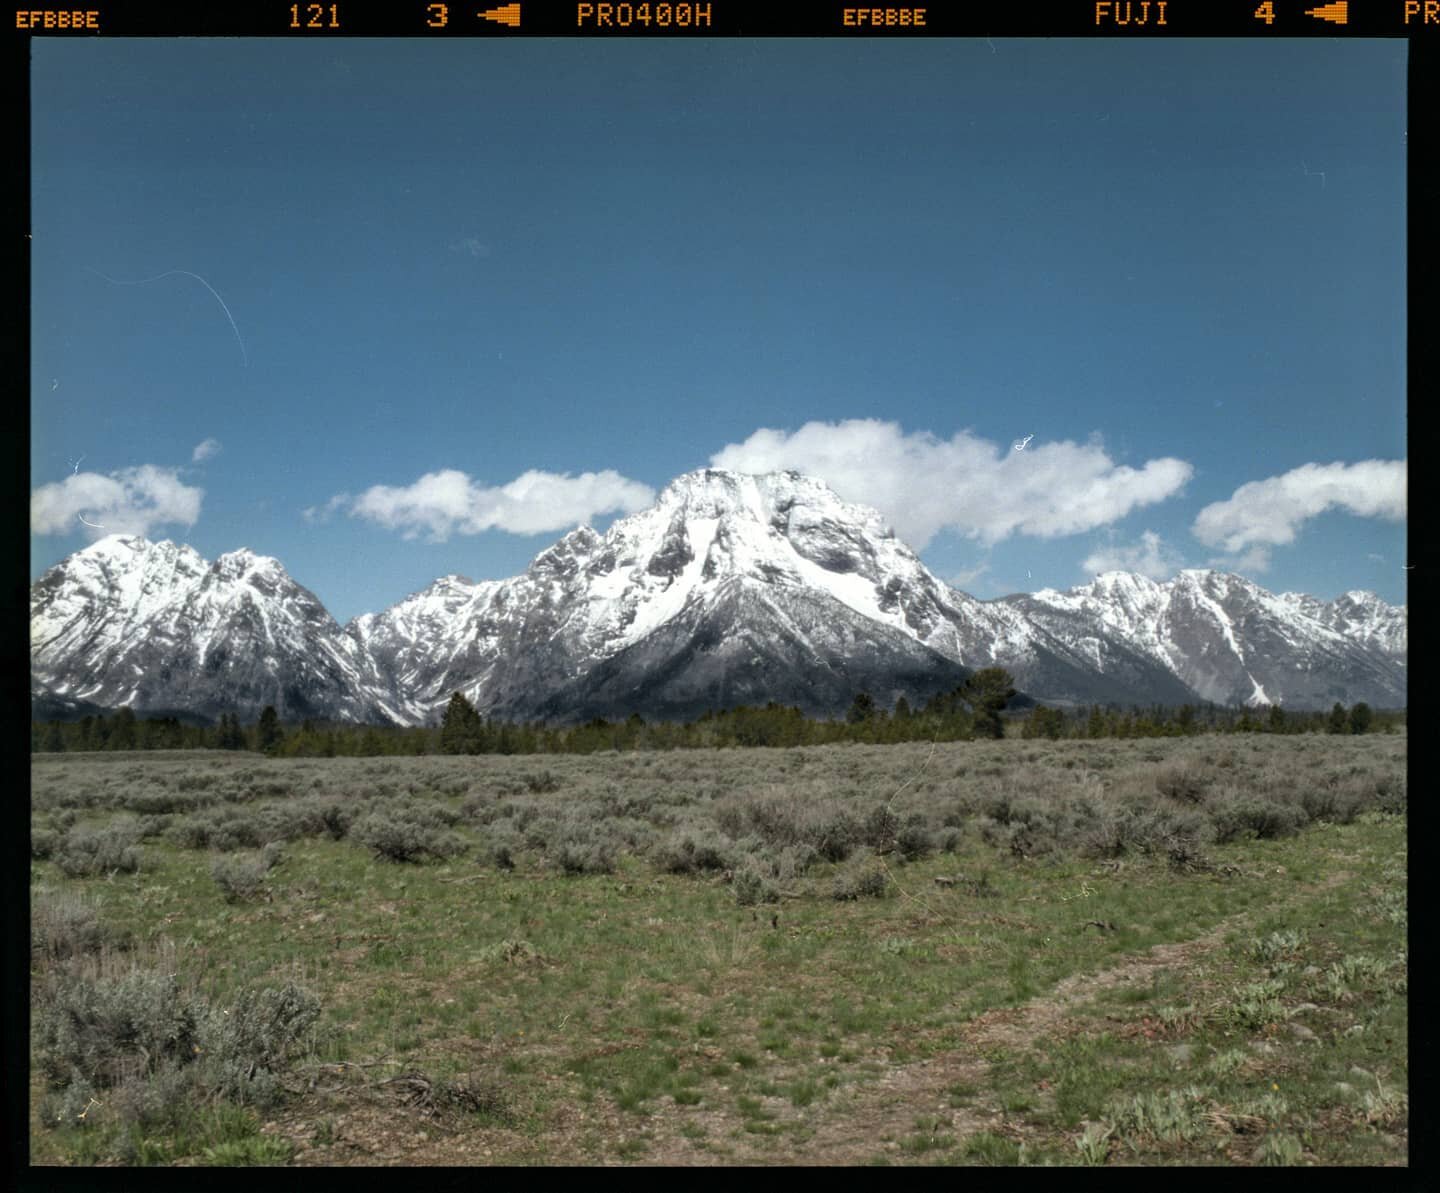 A straight on view of Mt. Moran on Medium Format. Be ready, there's going to be a lot of shots from @grandtetonnps and its VIEWS.
.
.
.
Shot on the Mamiya RB67, on Fujifilm Pro 400H